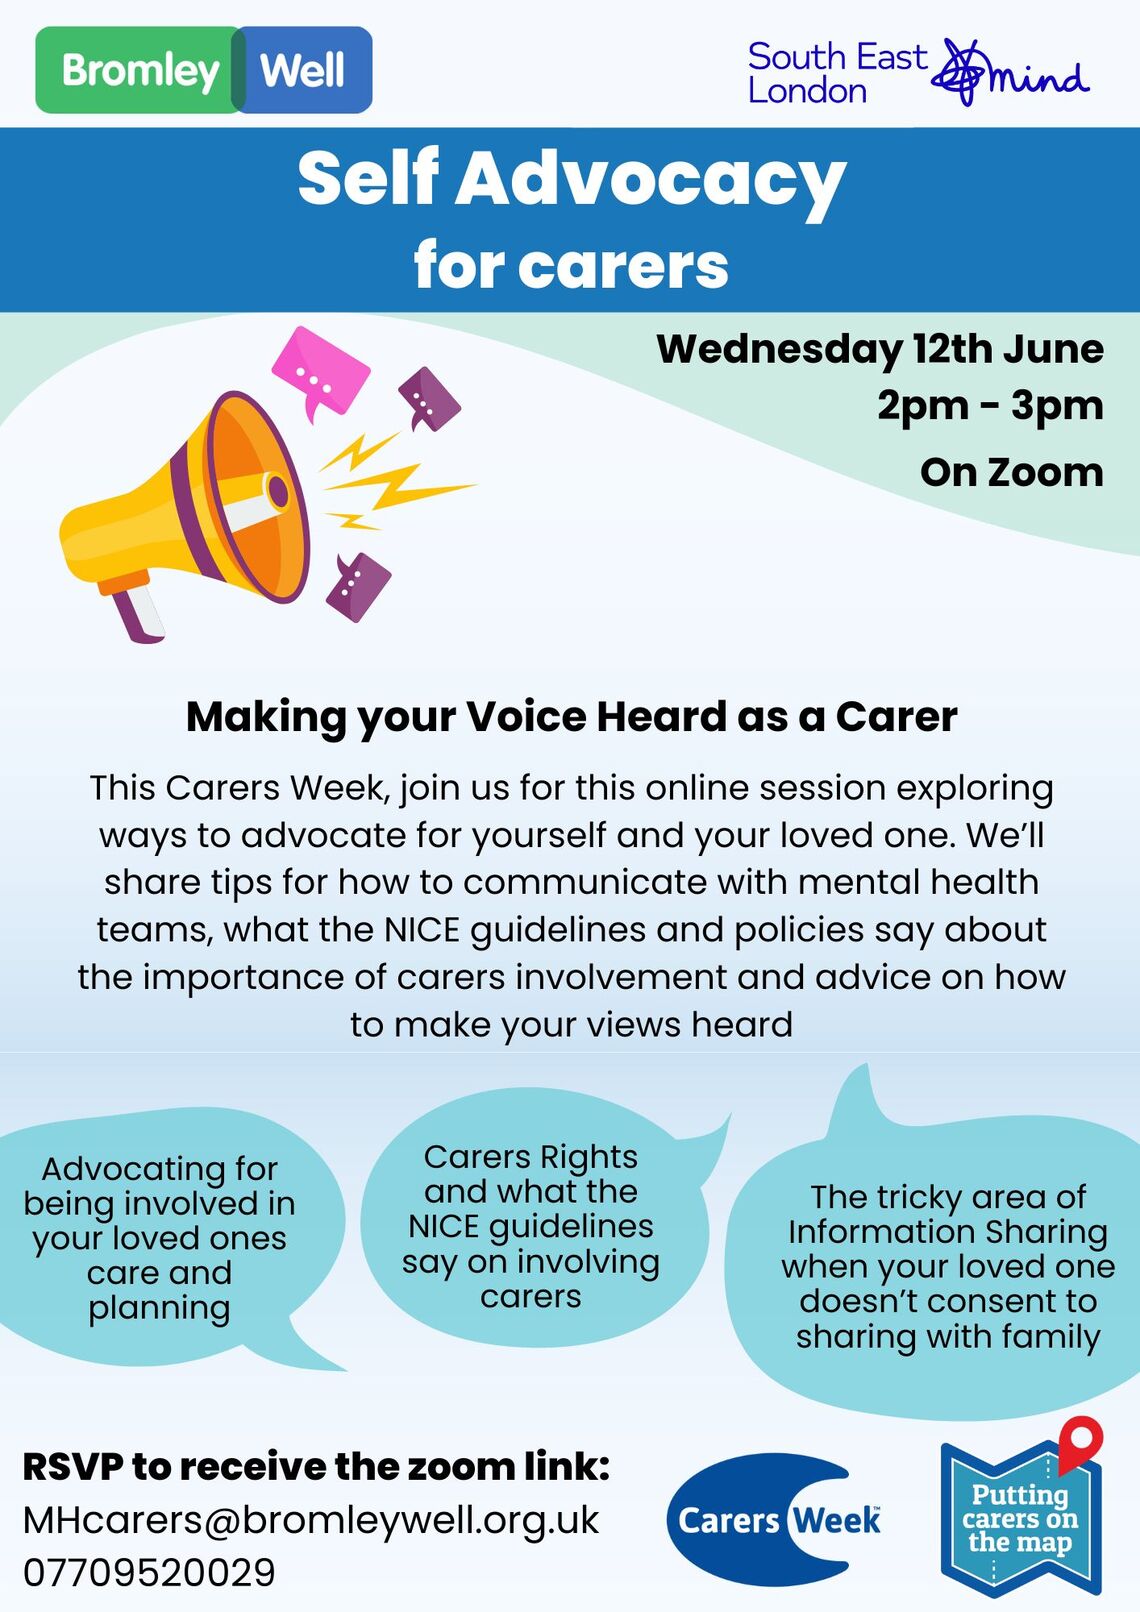 Advert for a carers self-advocacy event